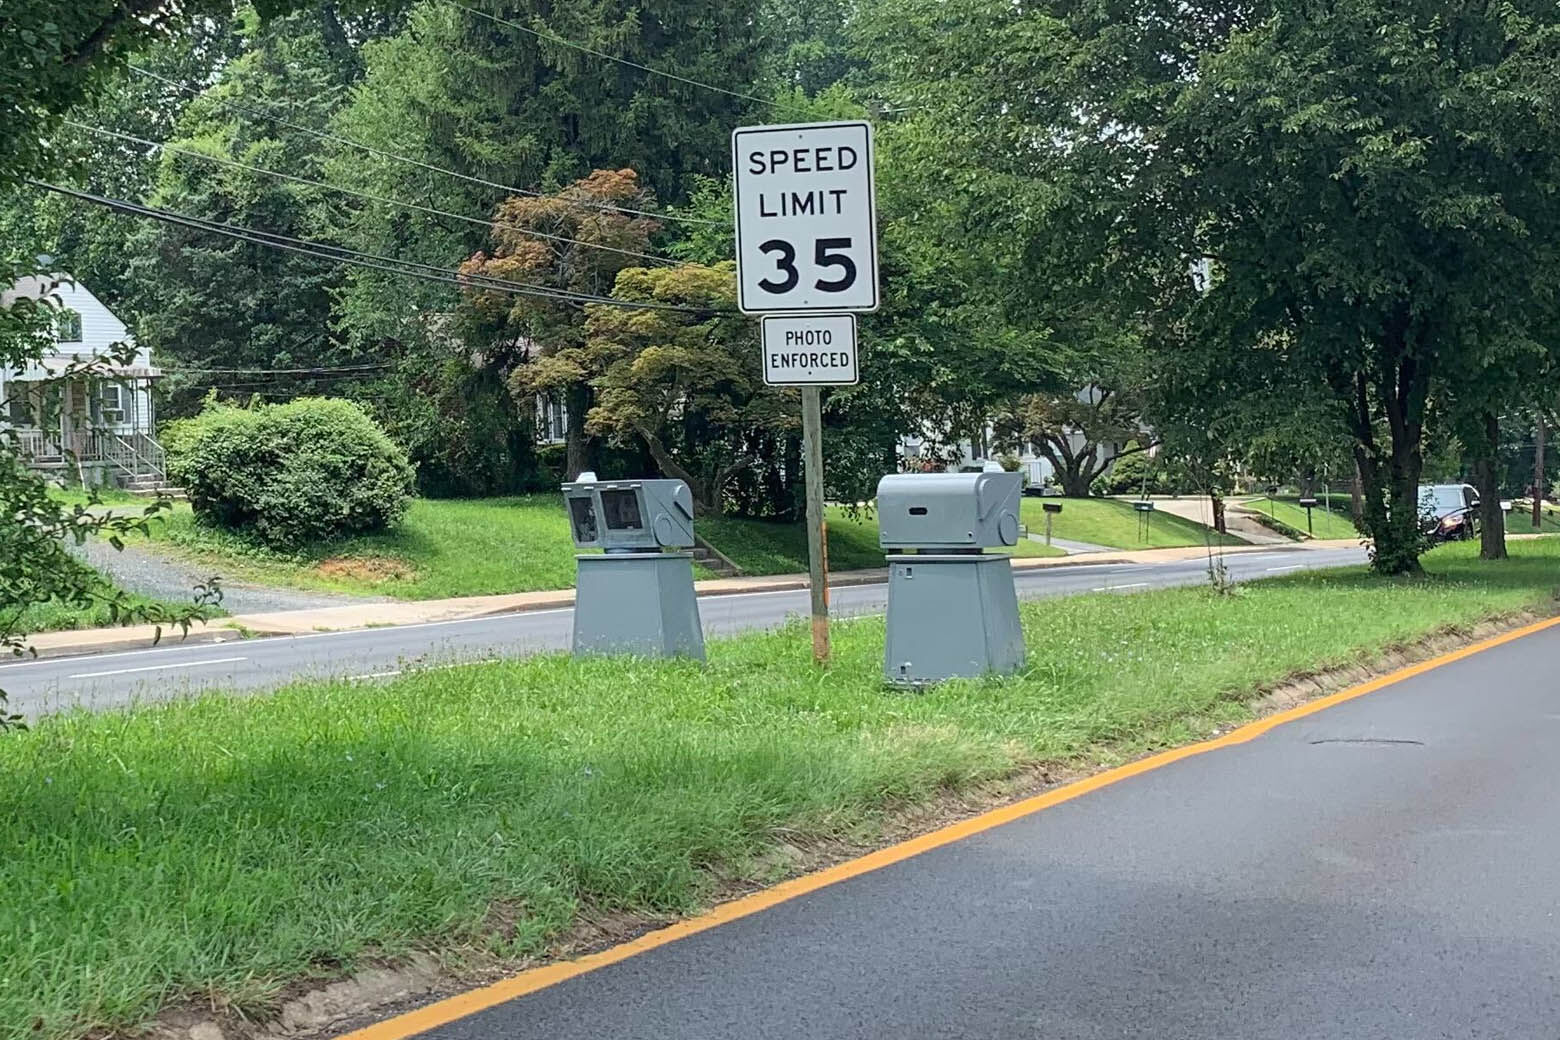 Some of the real speed cameras that the little library was designed to resemble. (WTOP/Mike Murillo)